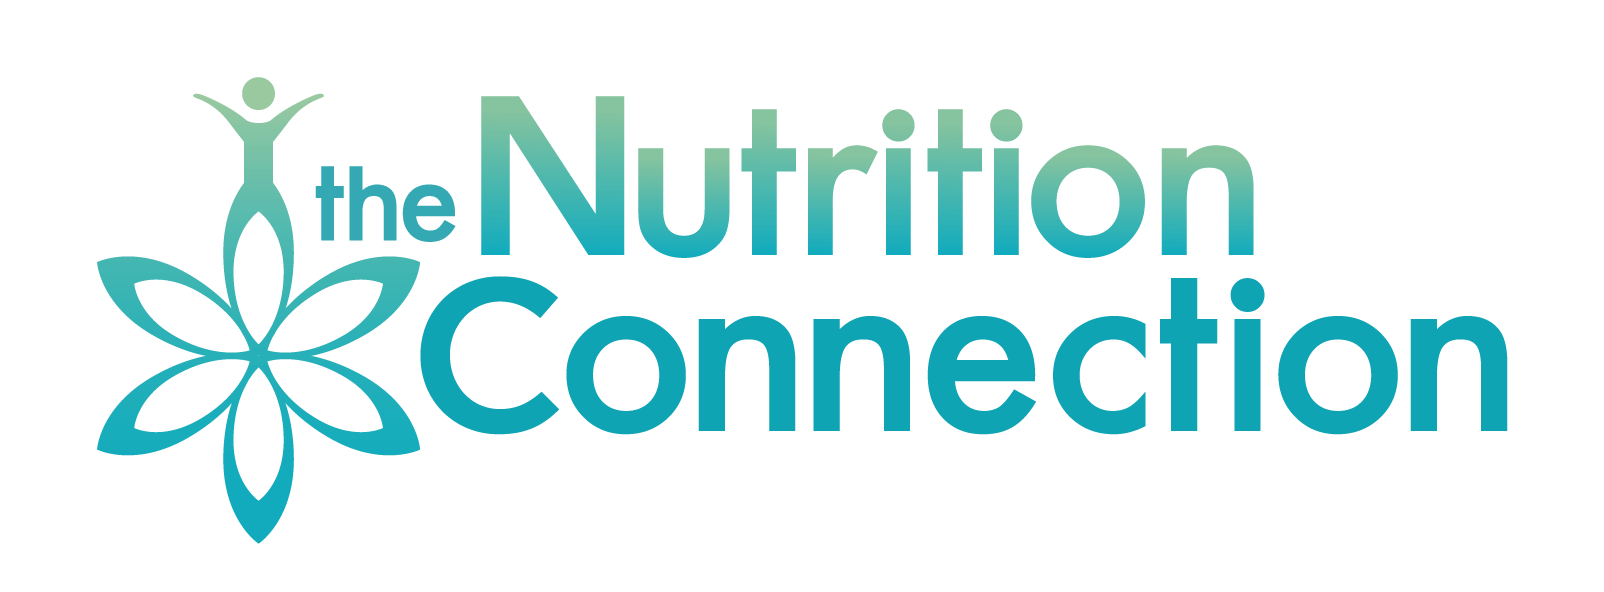 The Nutrition Connection Logo